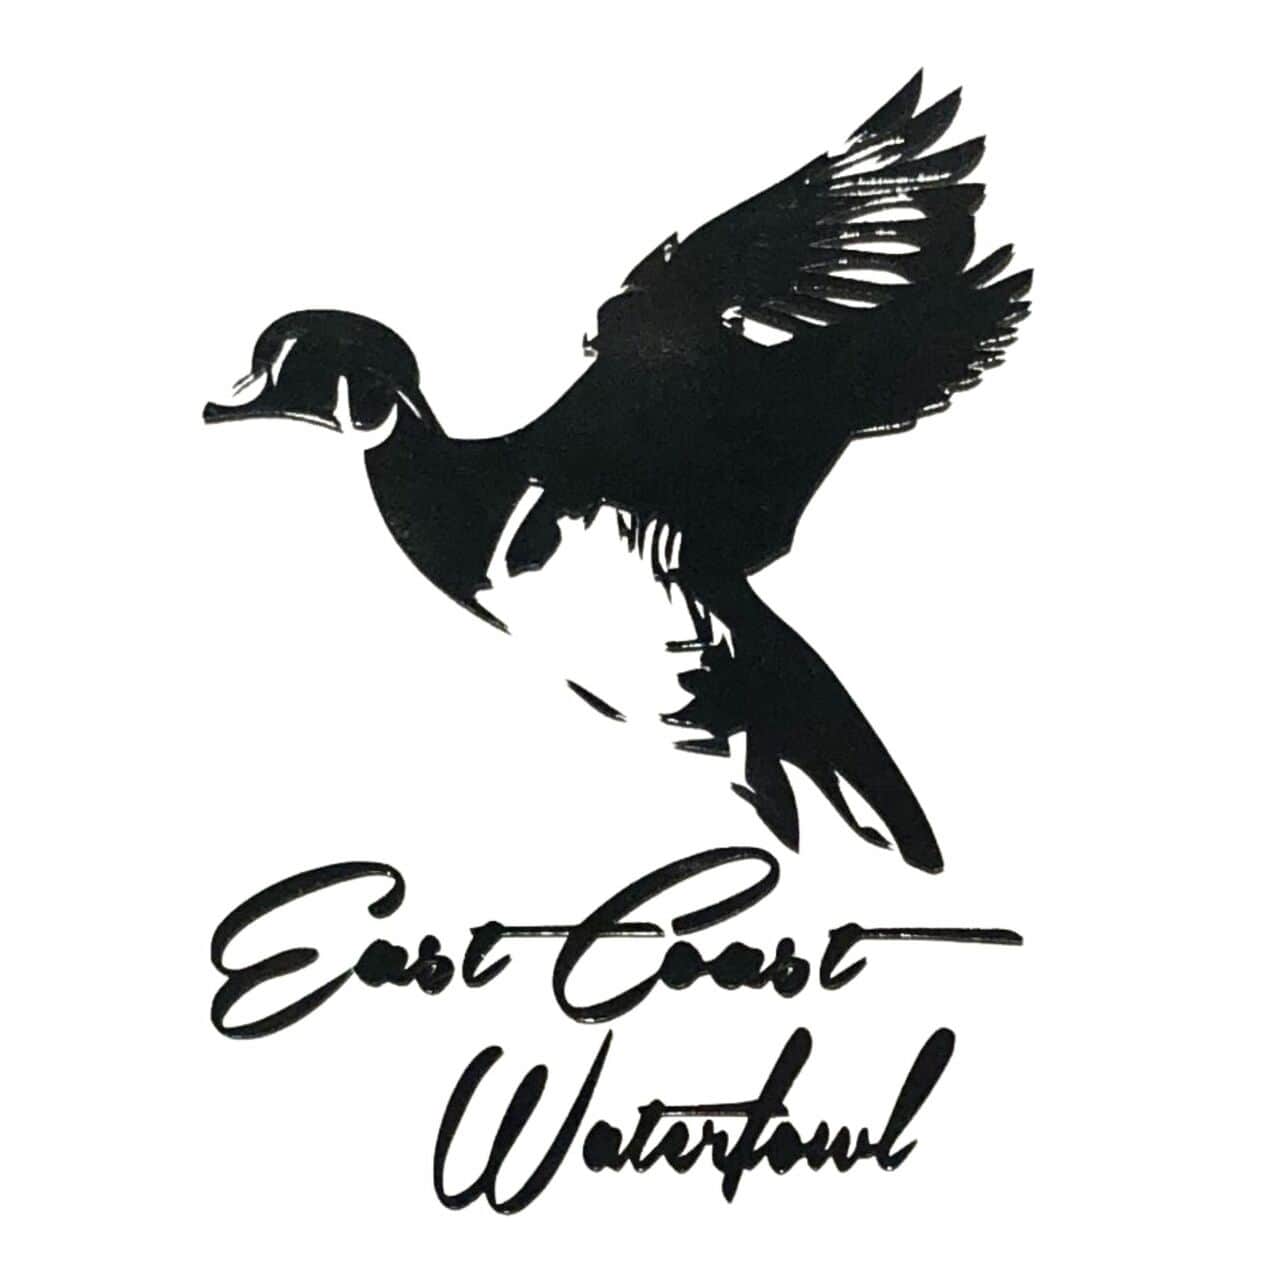 NEW Wood Duck Decal